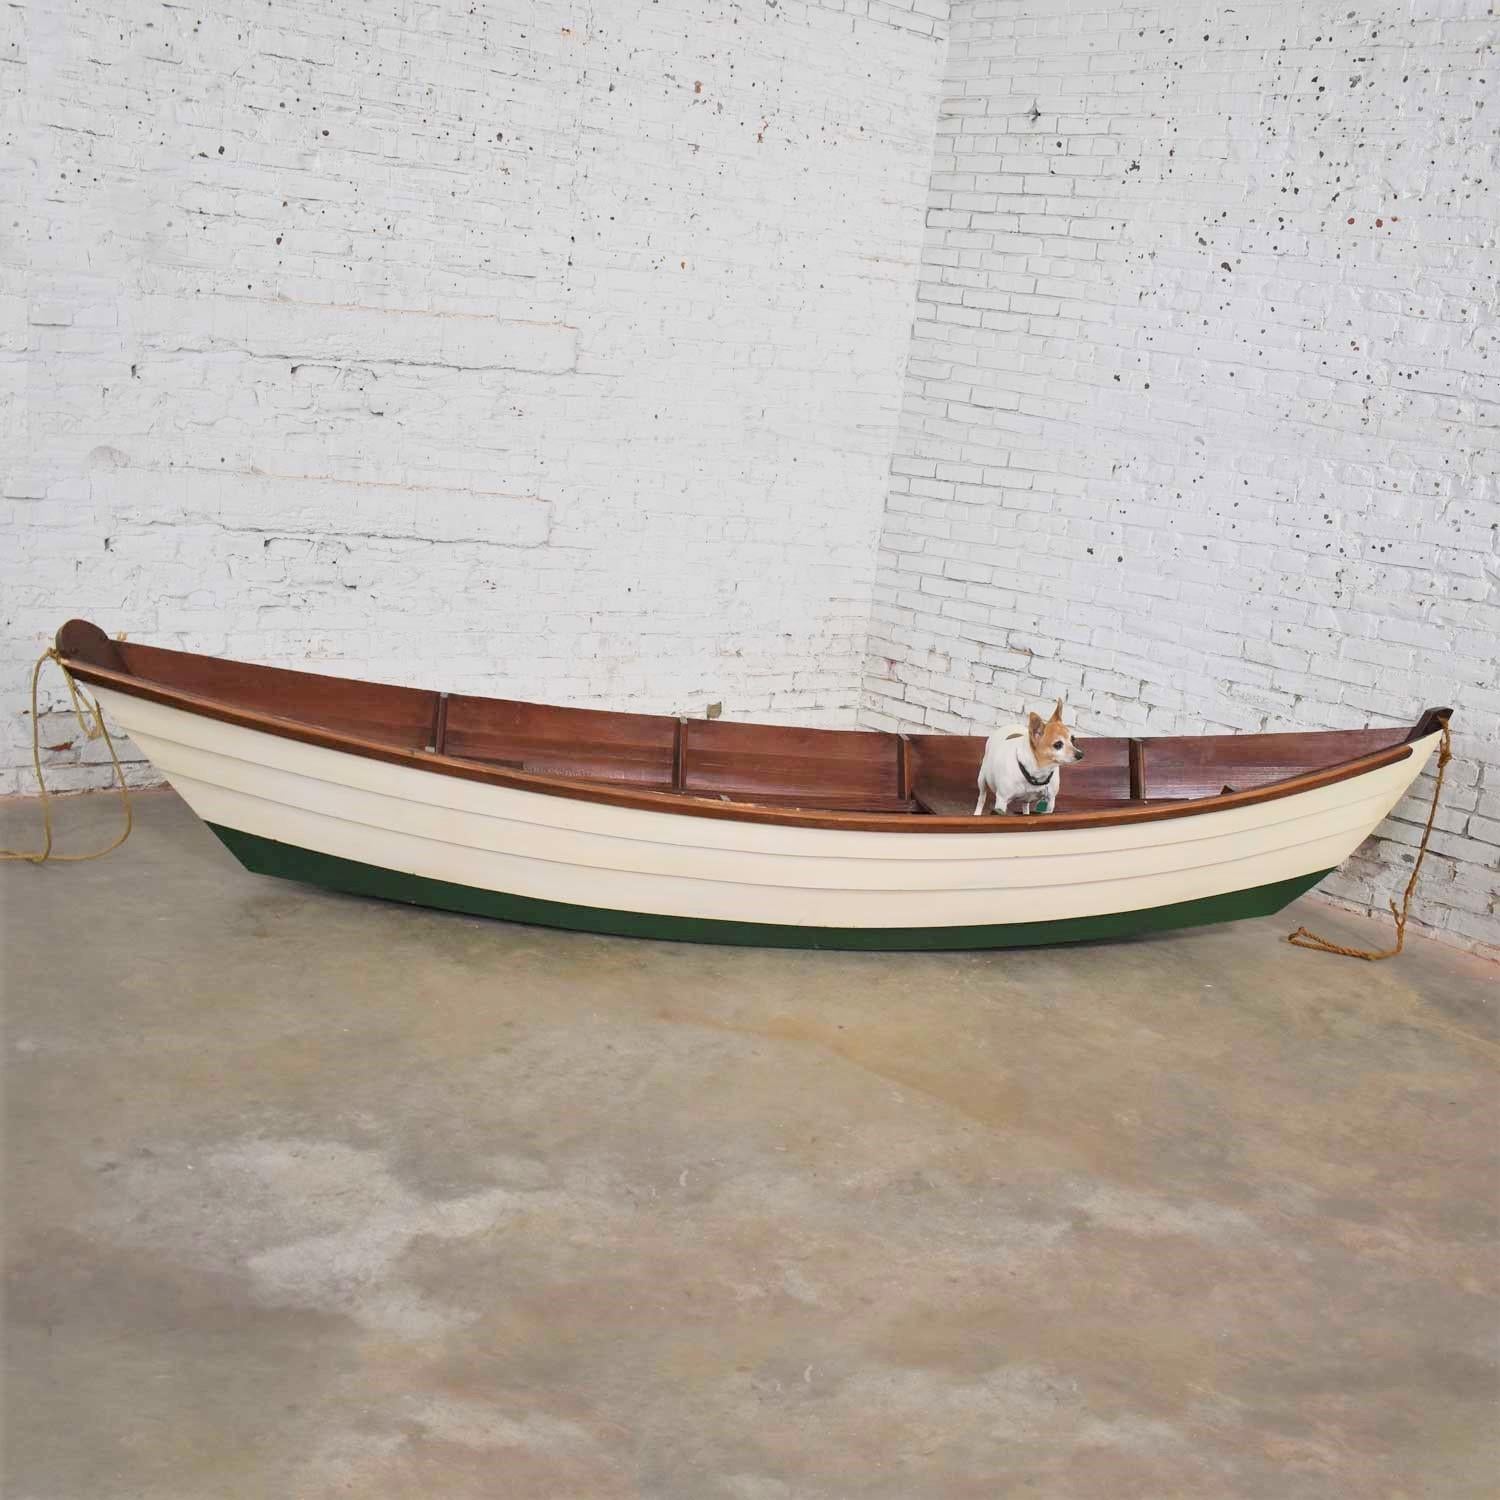 Other Vintage Wooden Rowboat for Maritime or Nautical Décor